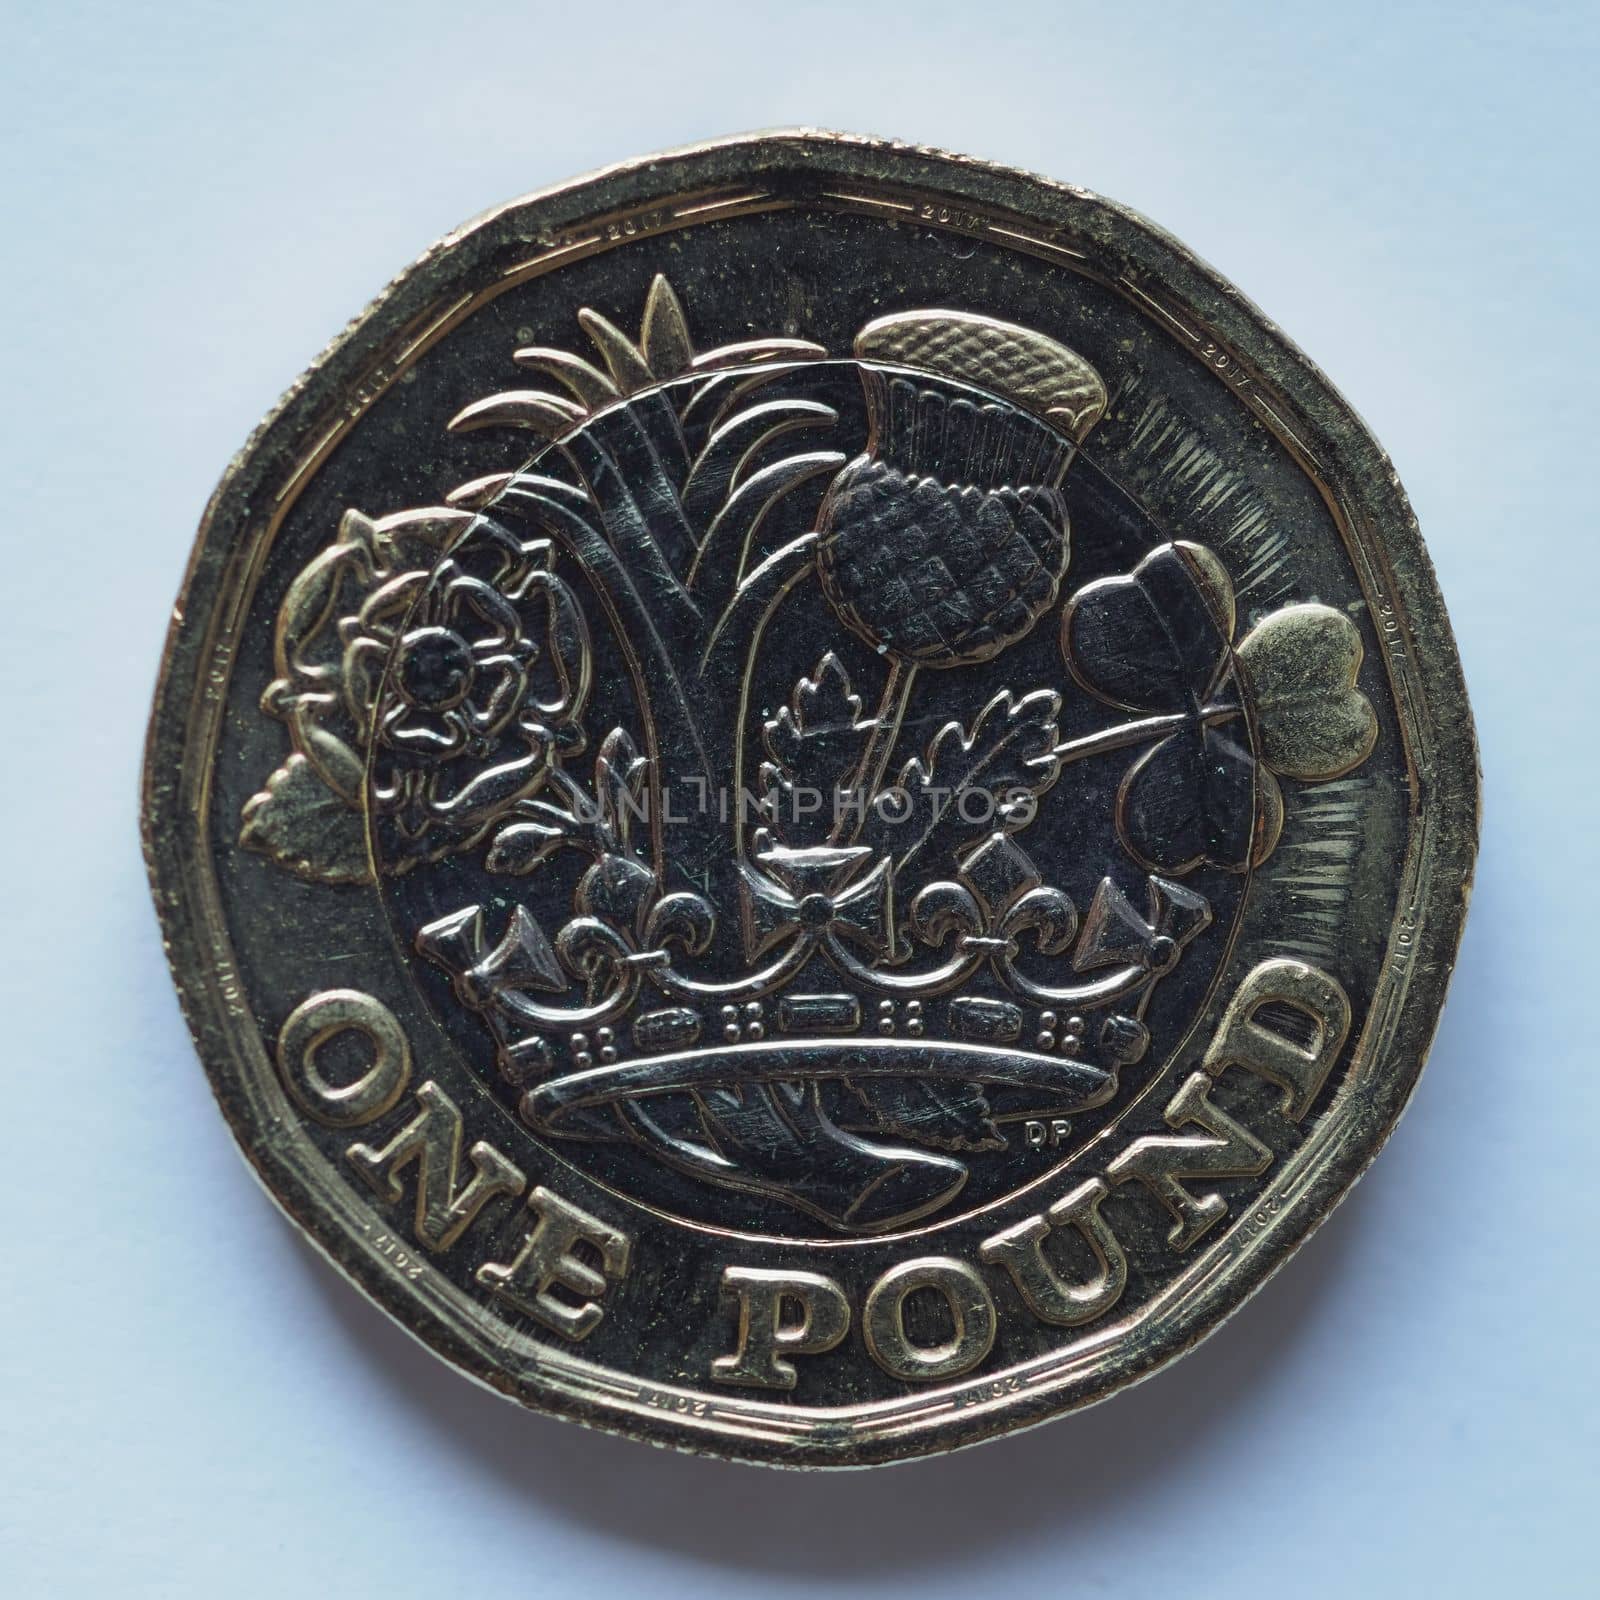 1 pound coin money (GBP), currency of United Kingdom